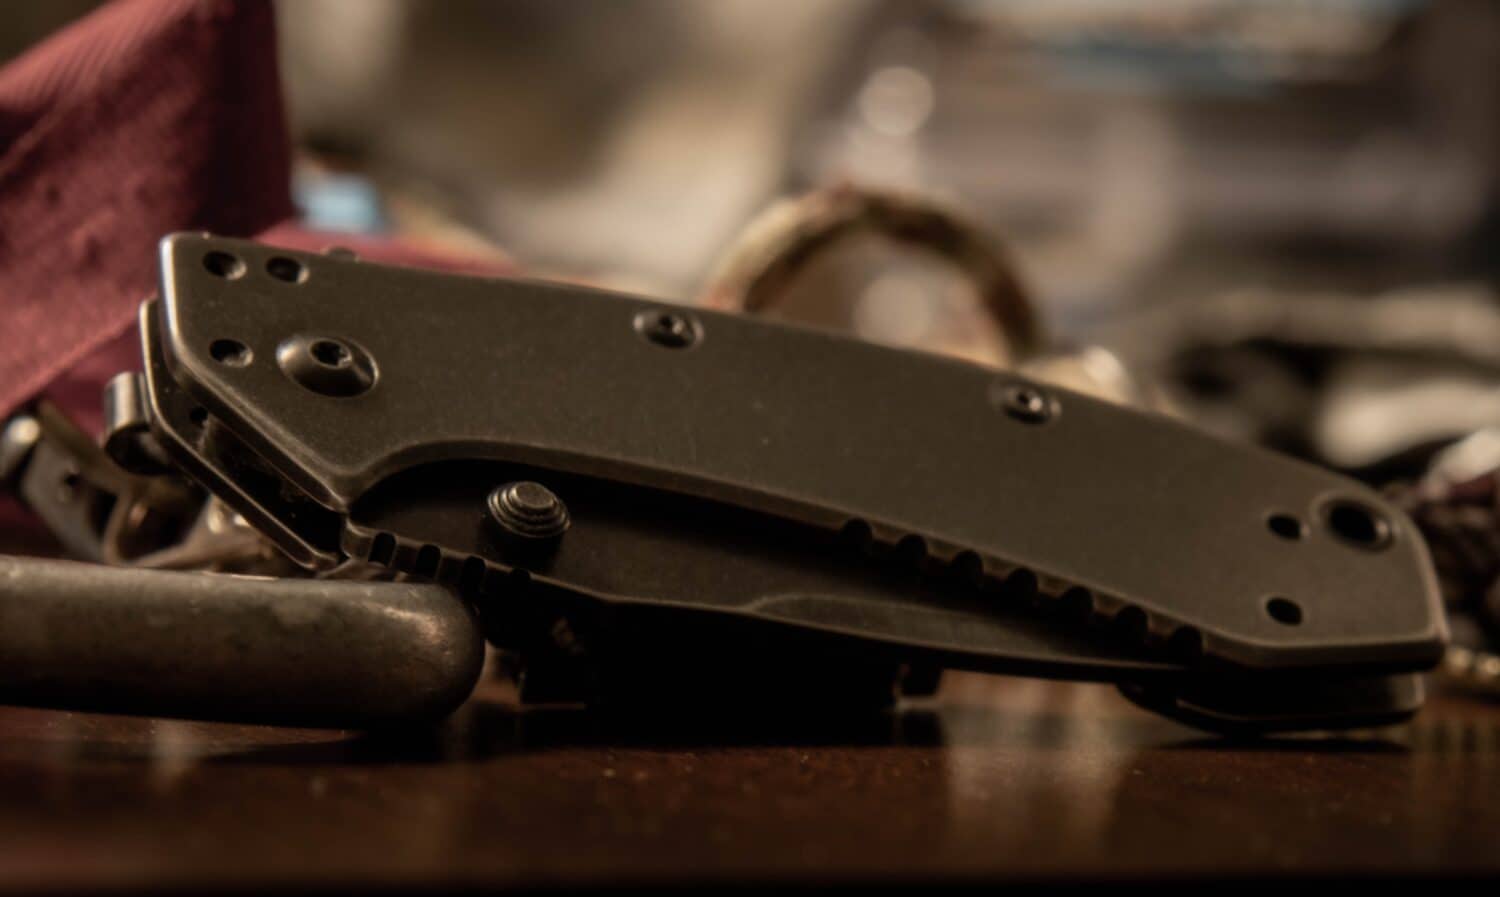 A Kershaw knife rests among a pile of equipment.